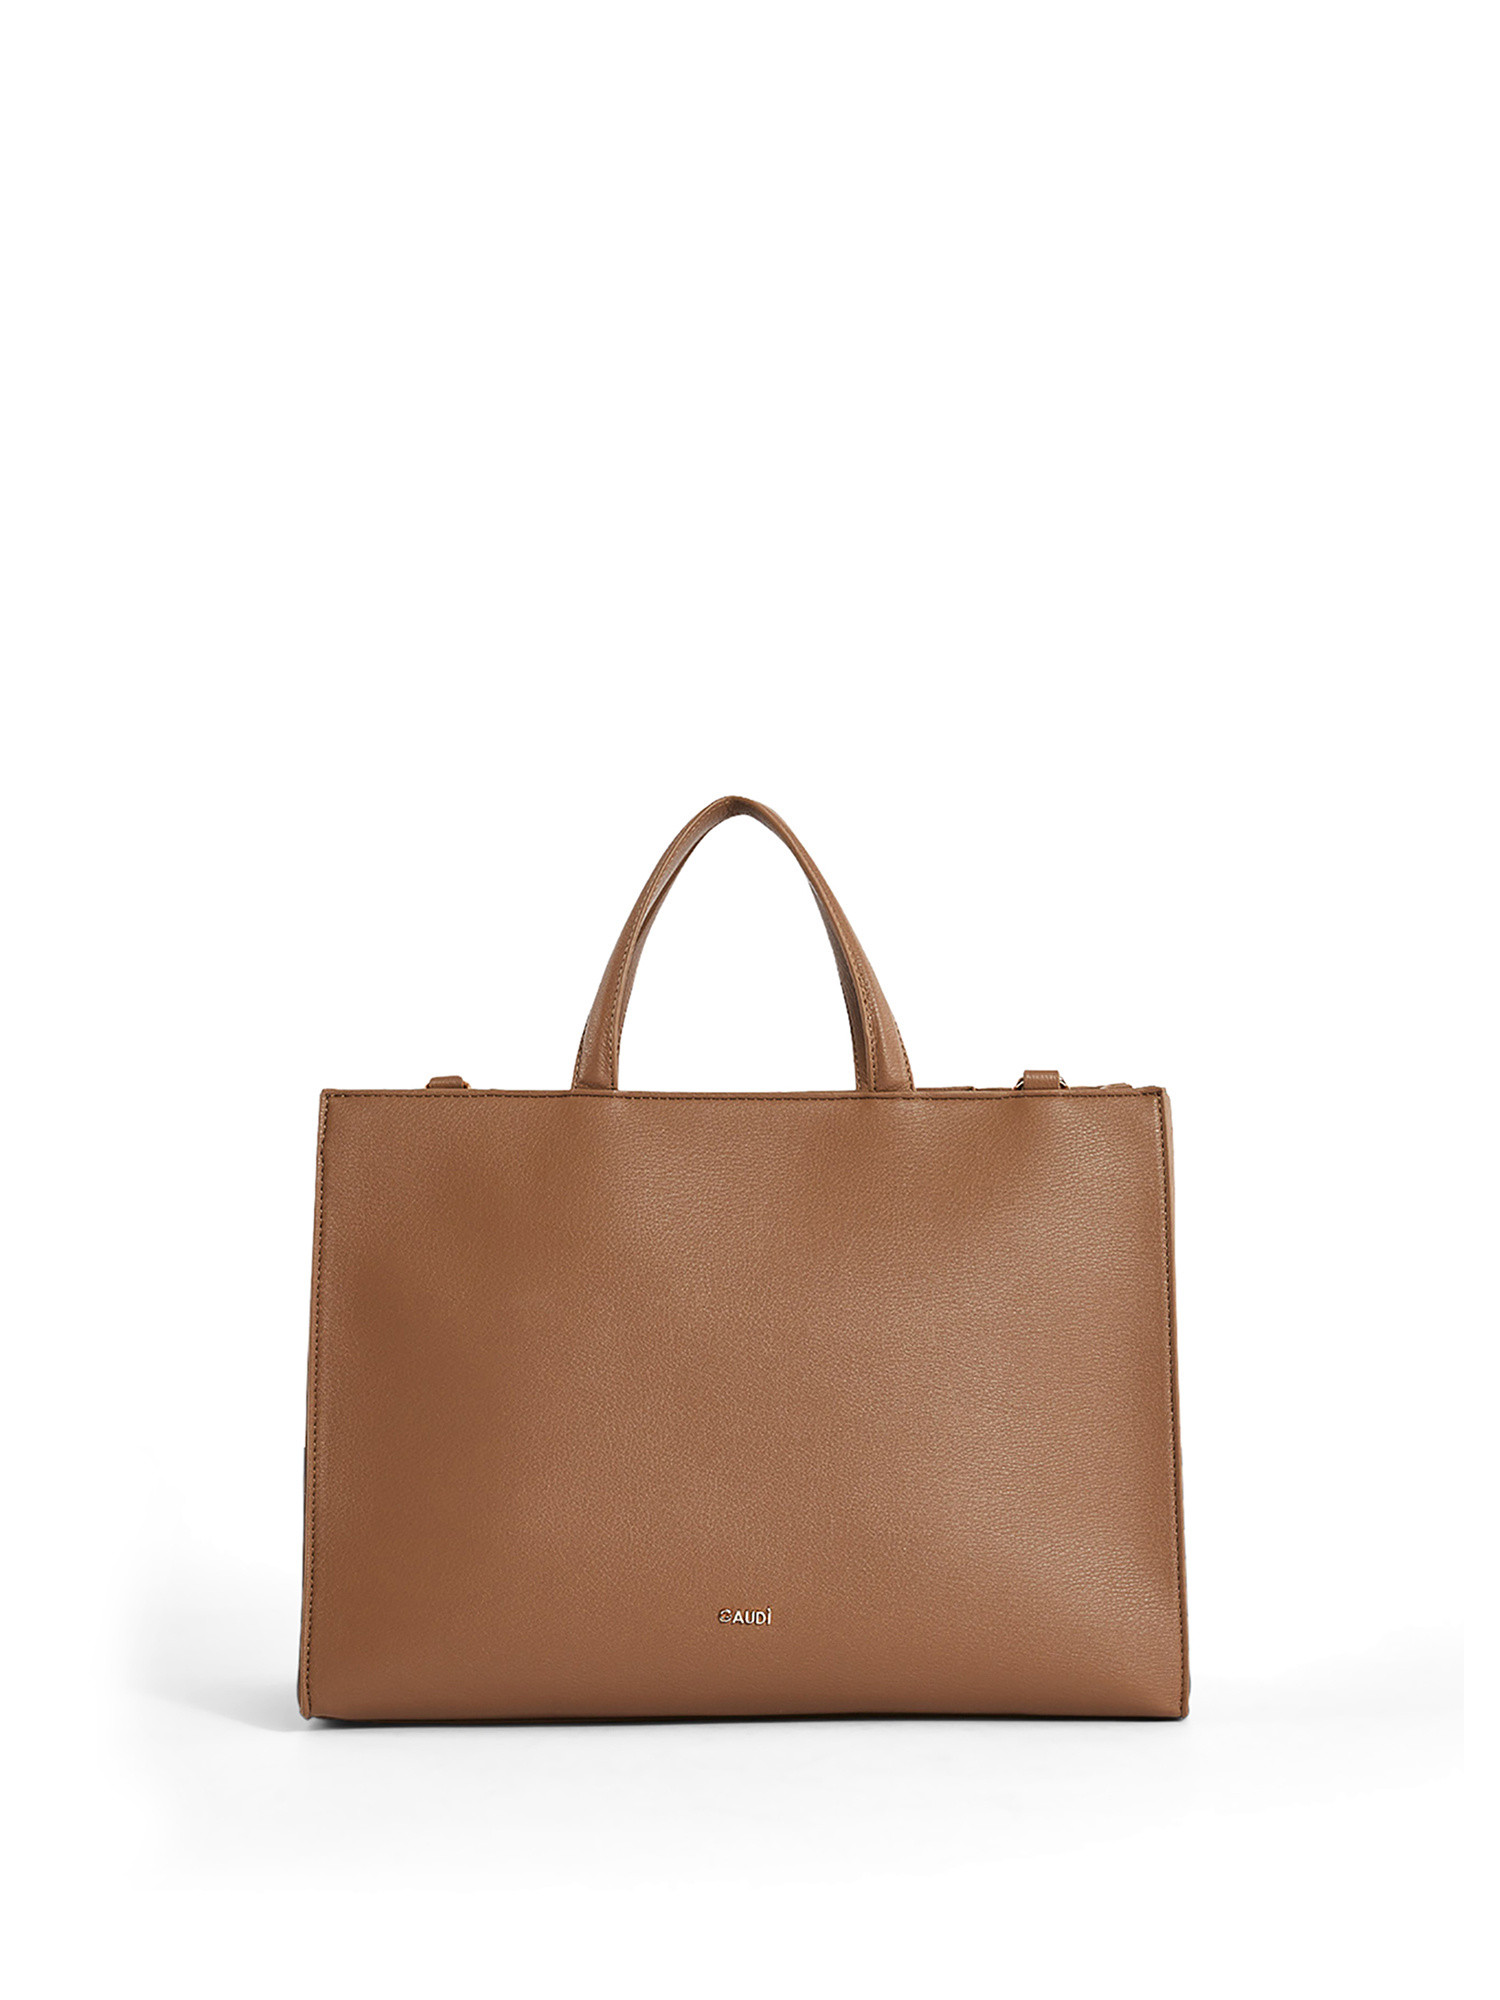 Gaudì - Shopping bag in raffia and imitation leather, Camel, large image number 0